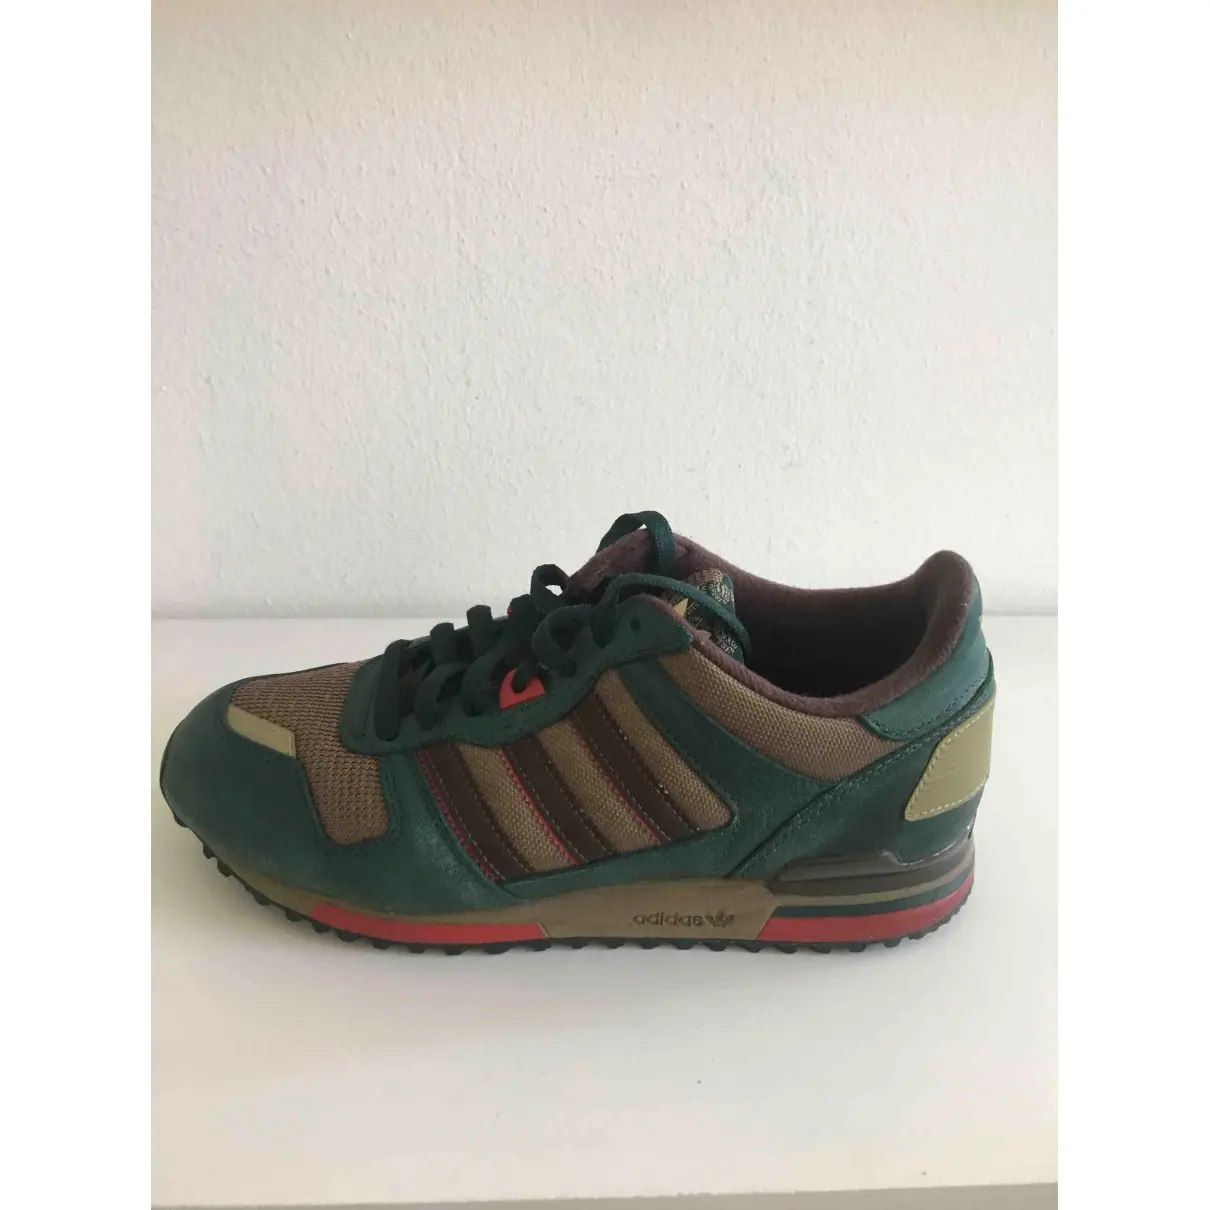 Buy Adidas ZX cloth low trainers online